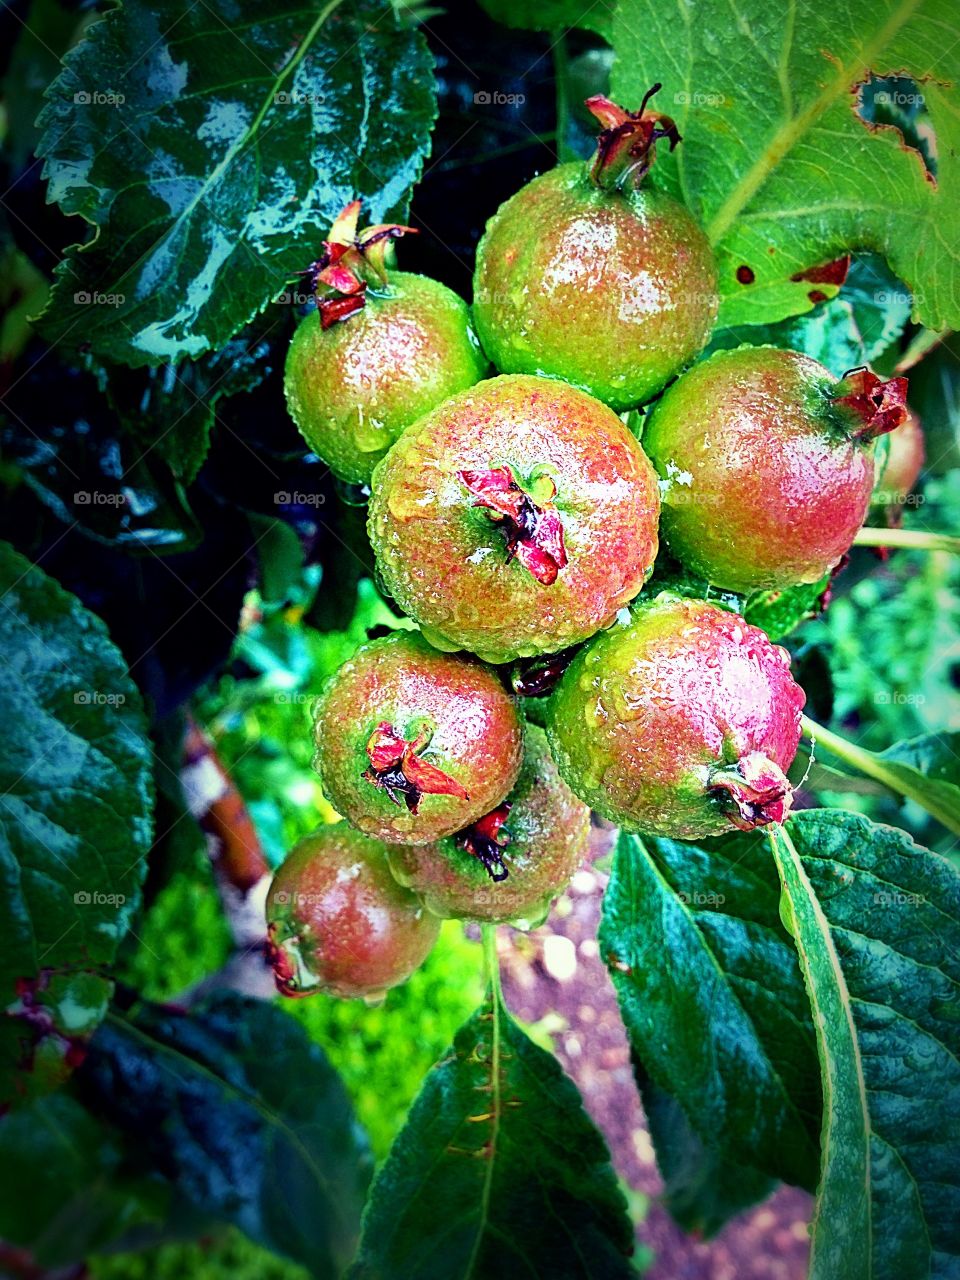 Fresh apples with dew drop hanging on plant